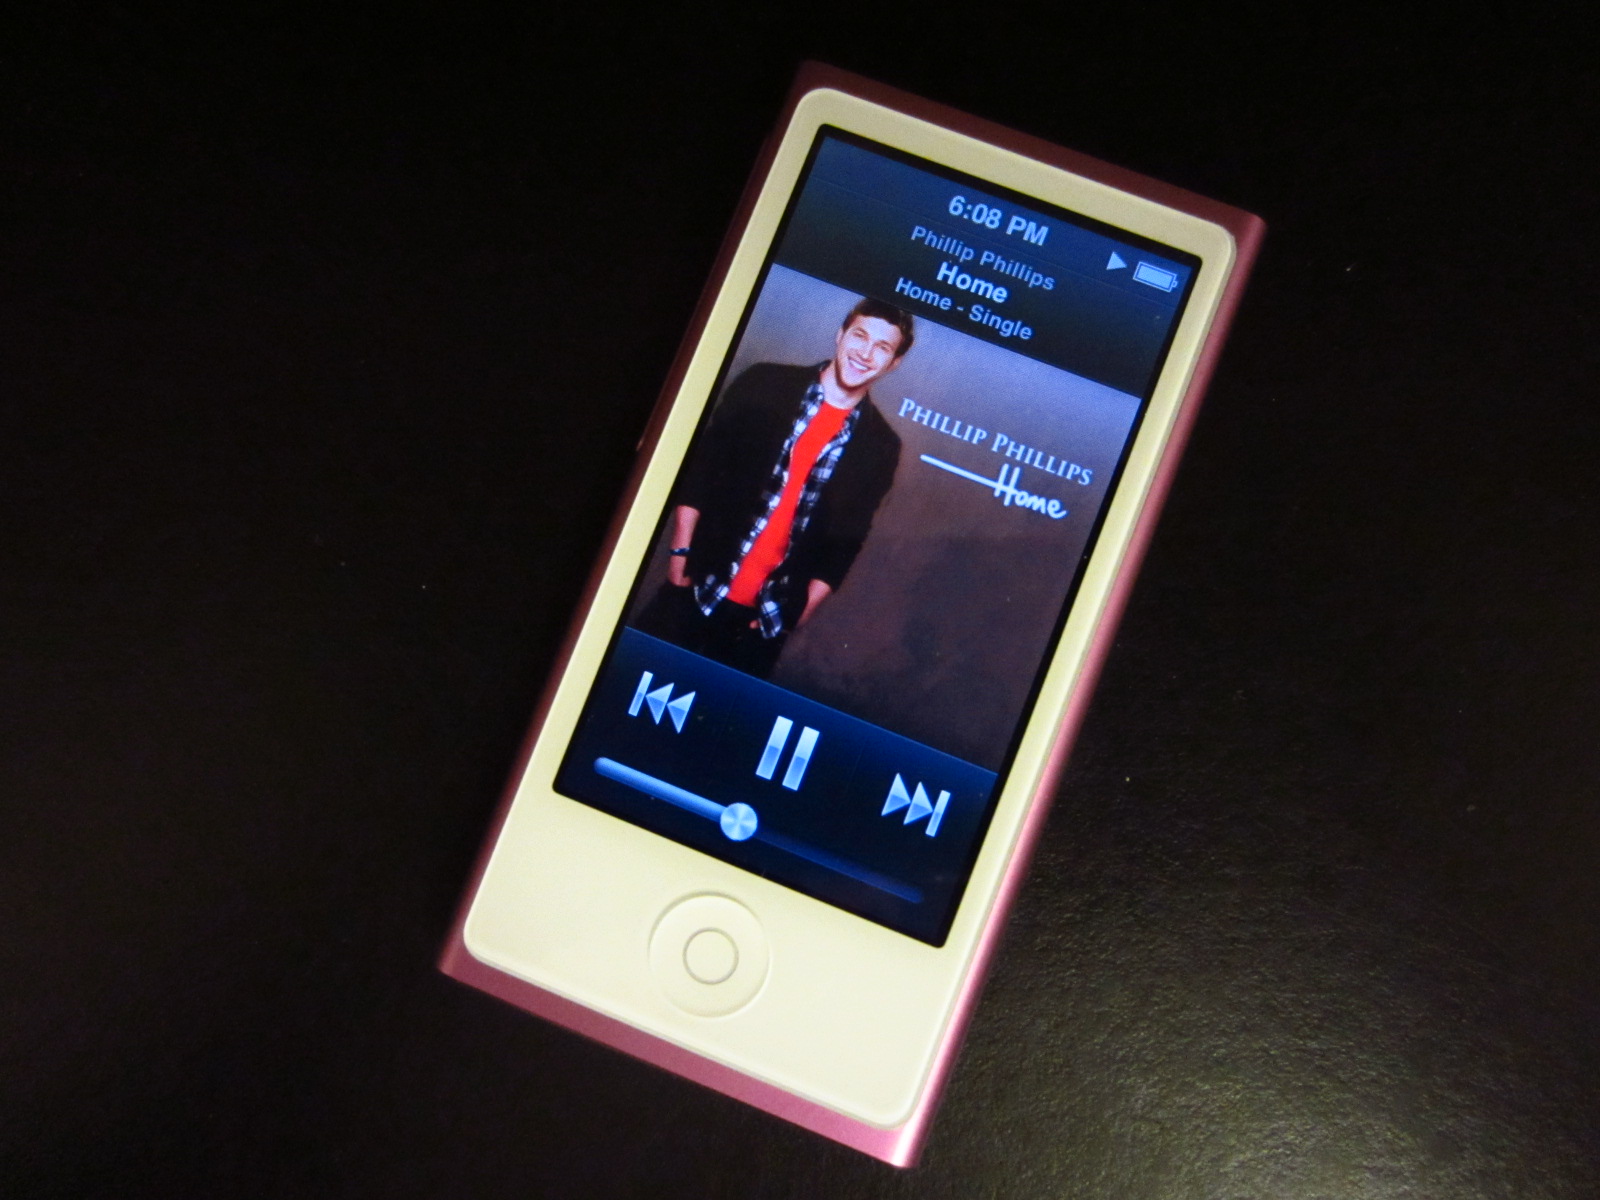 Review: Apple iPod nano 7th Generation and EarPods Sound & Vision